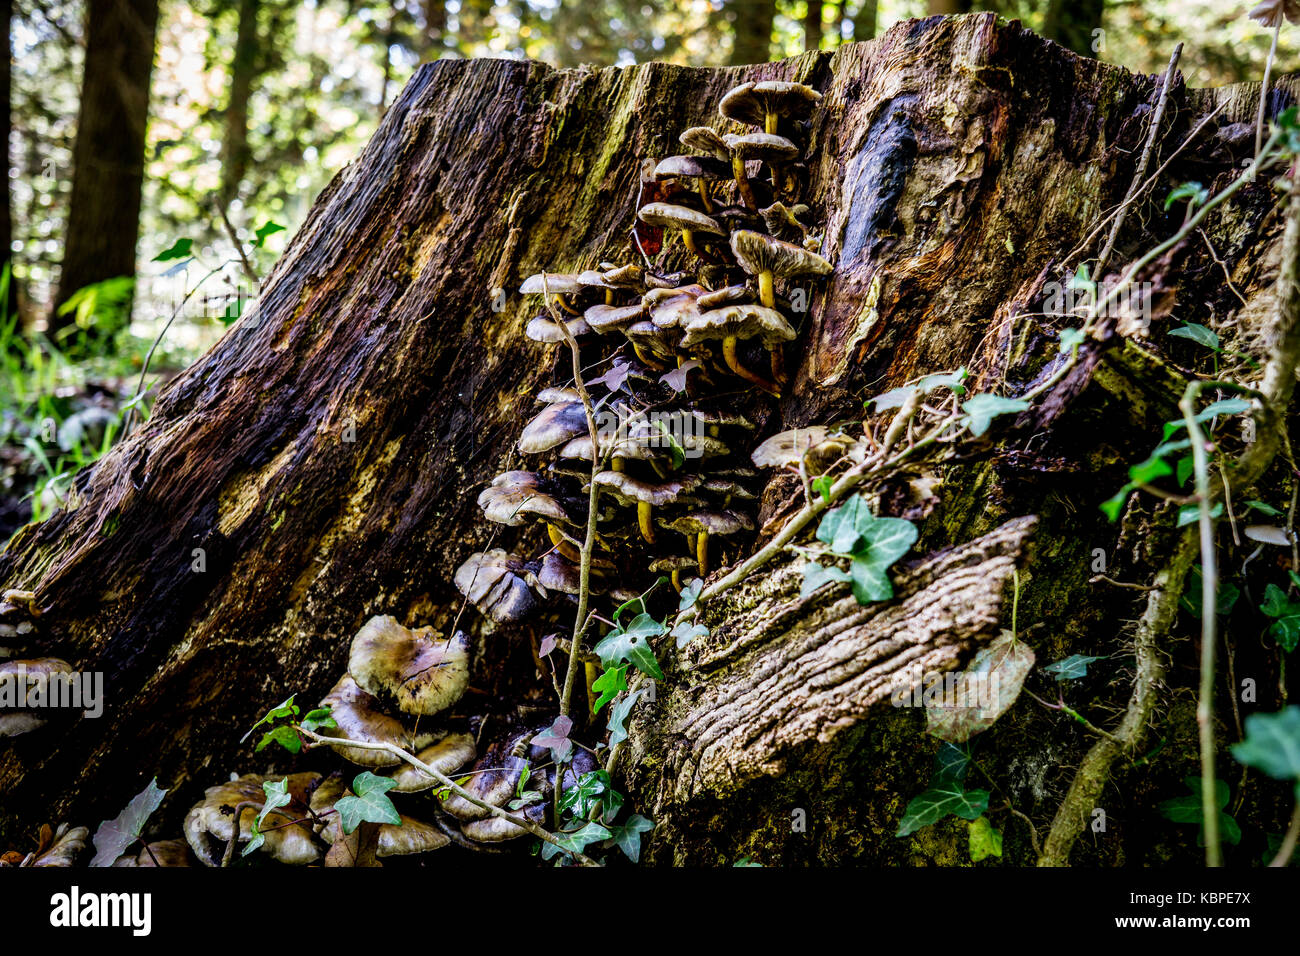 A close up of mushrooms on a tree in a forest Stock Photo